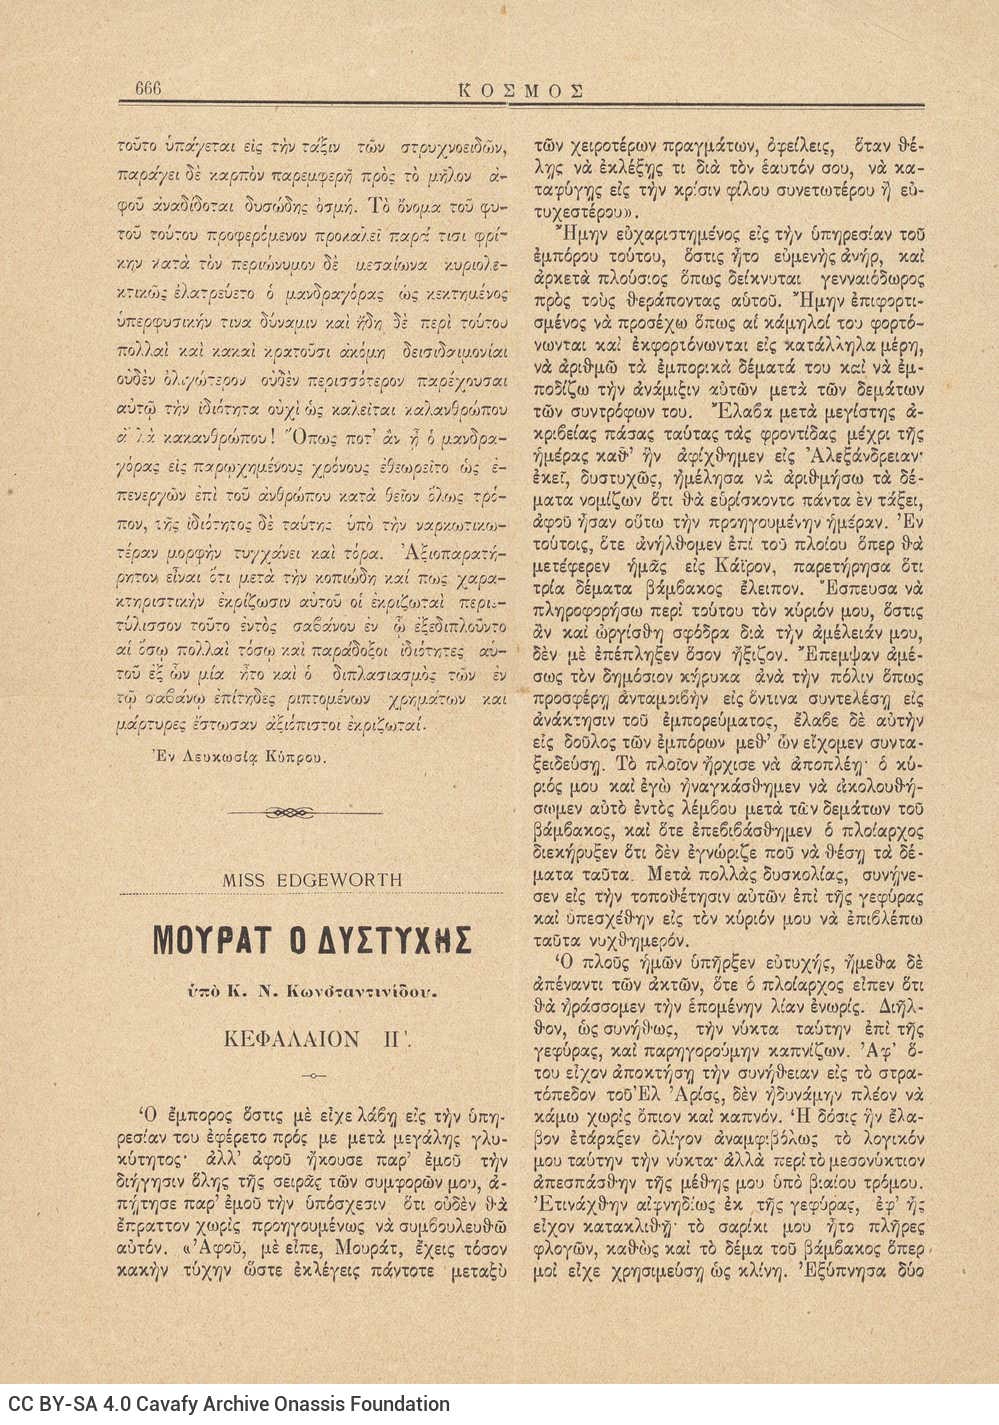 Clipping from the journal *Kosmos*. It includes pages 665-666 with the article by G. D. Petridis "Apo tin agglikin votanikin"